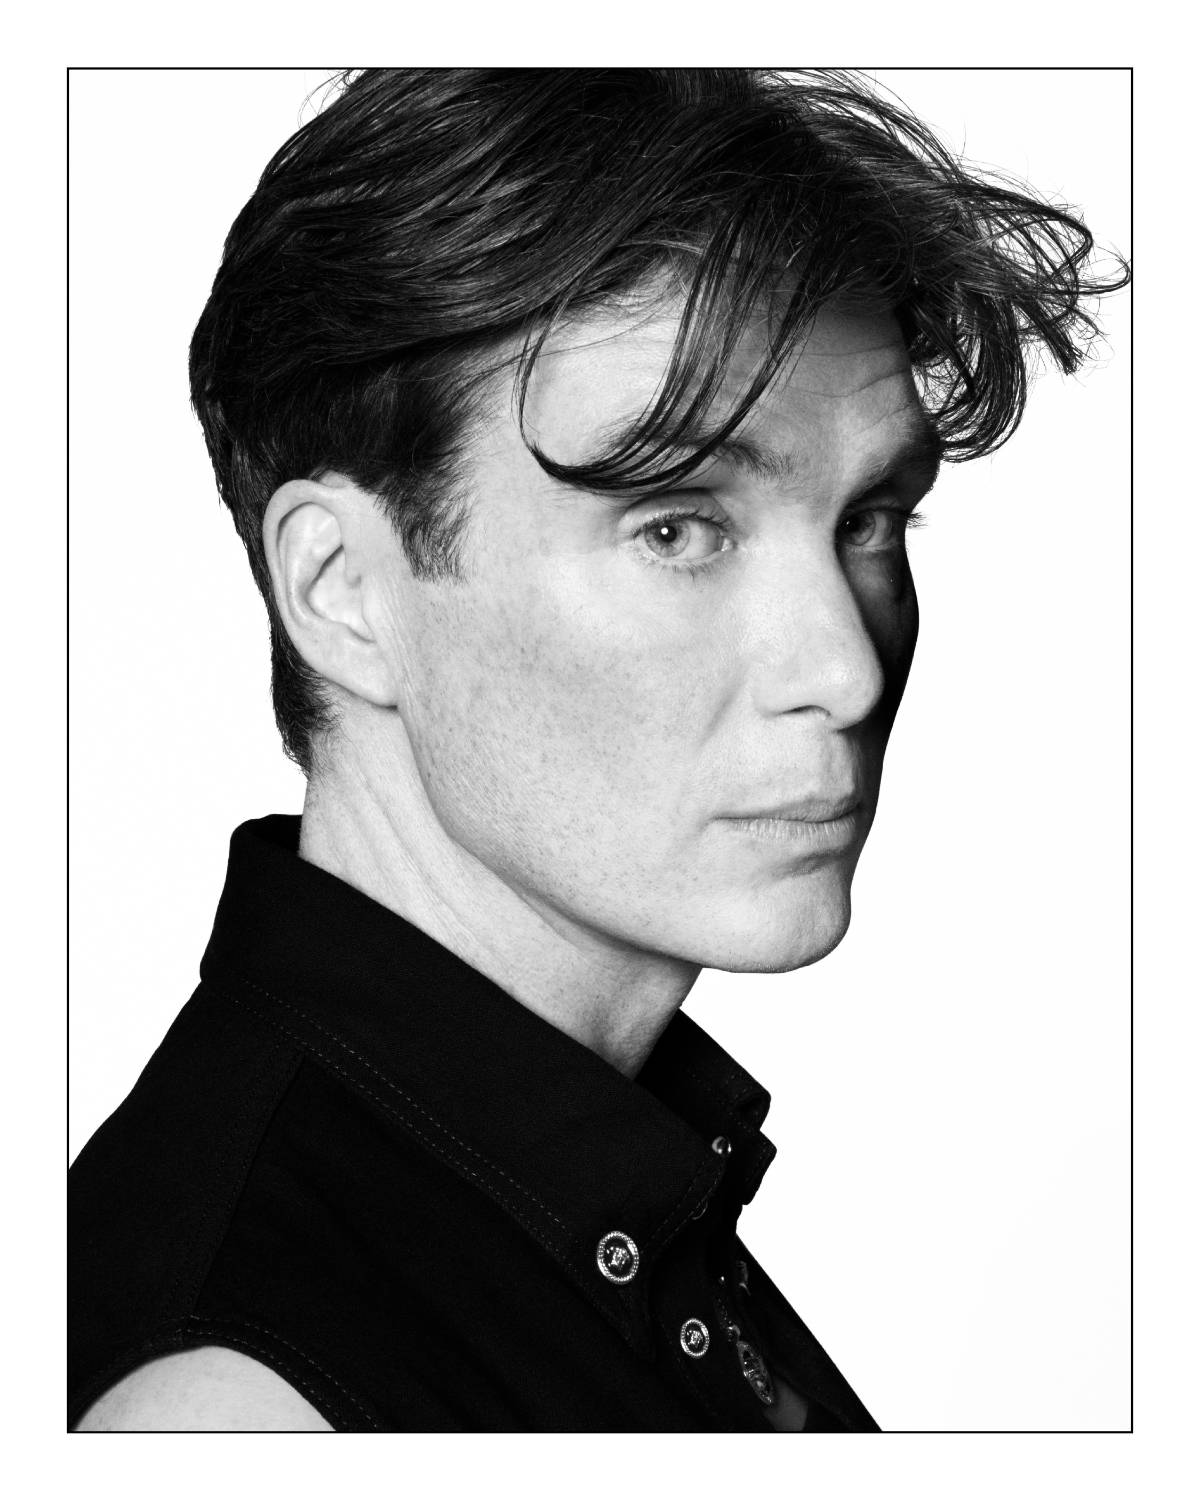 The New Versace Icons Collection Campaign Starring Anne Hathaway And Cillian Murphy